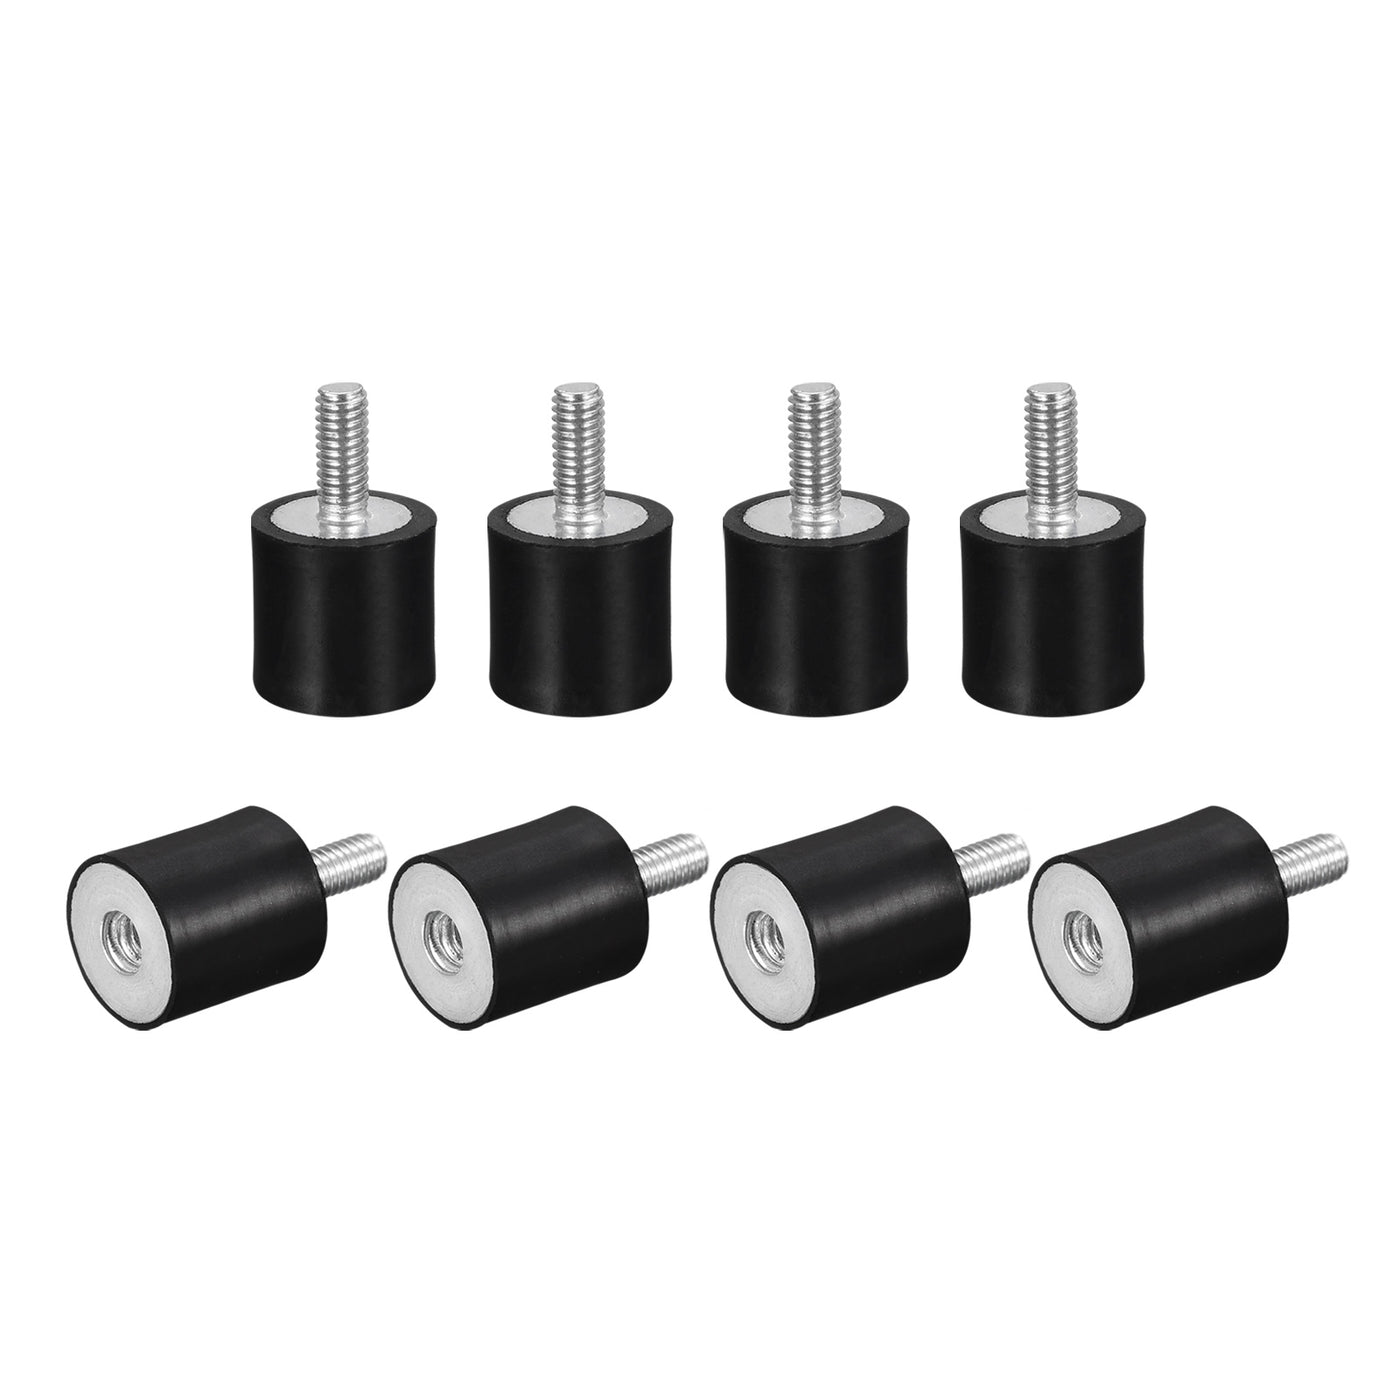 uxcell Uxcell Rubber Mount 10pcs M4 Male/Female Vibration Isolator Shock Absorber, D15mmxH15mm